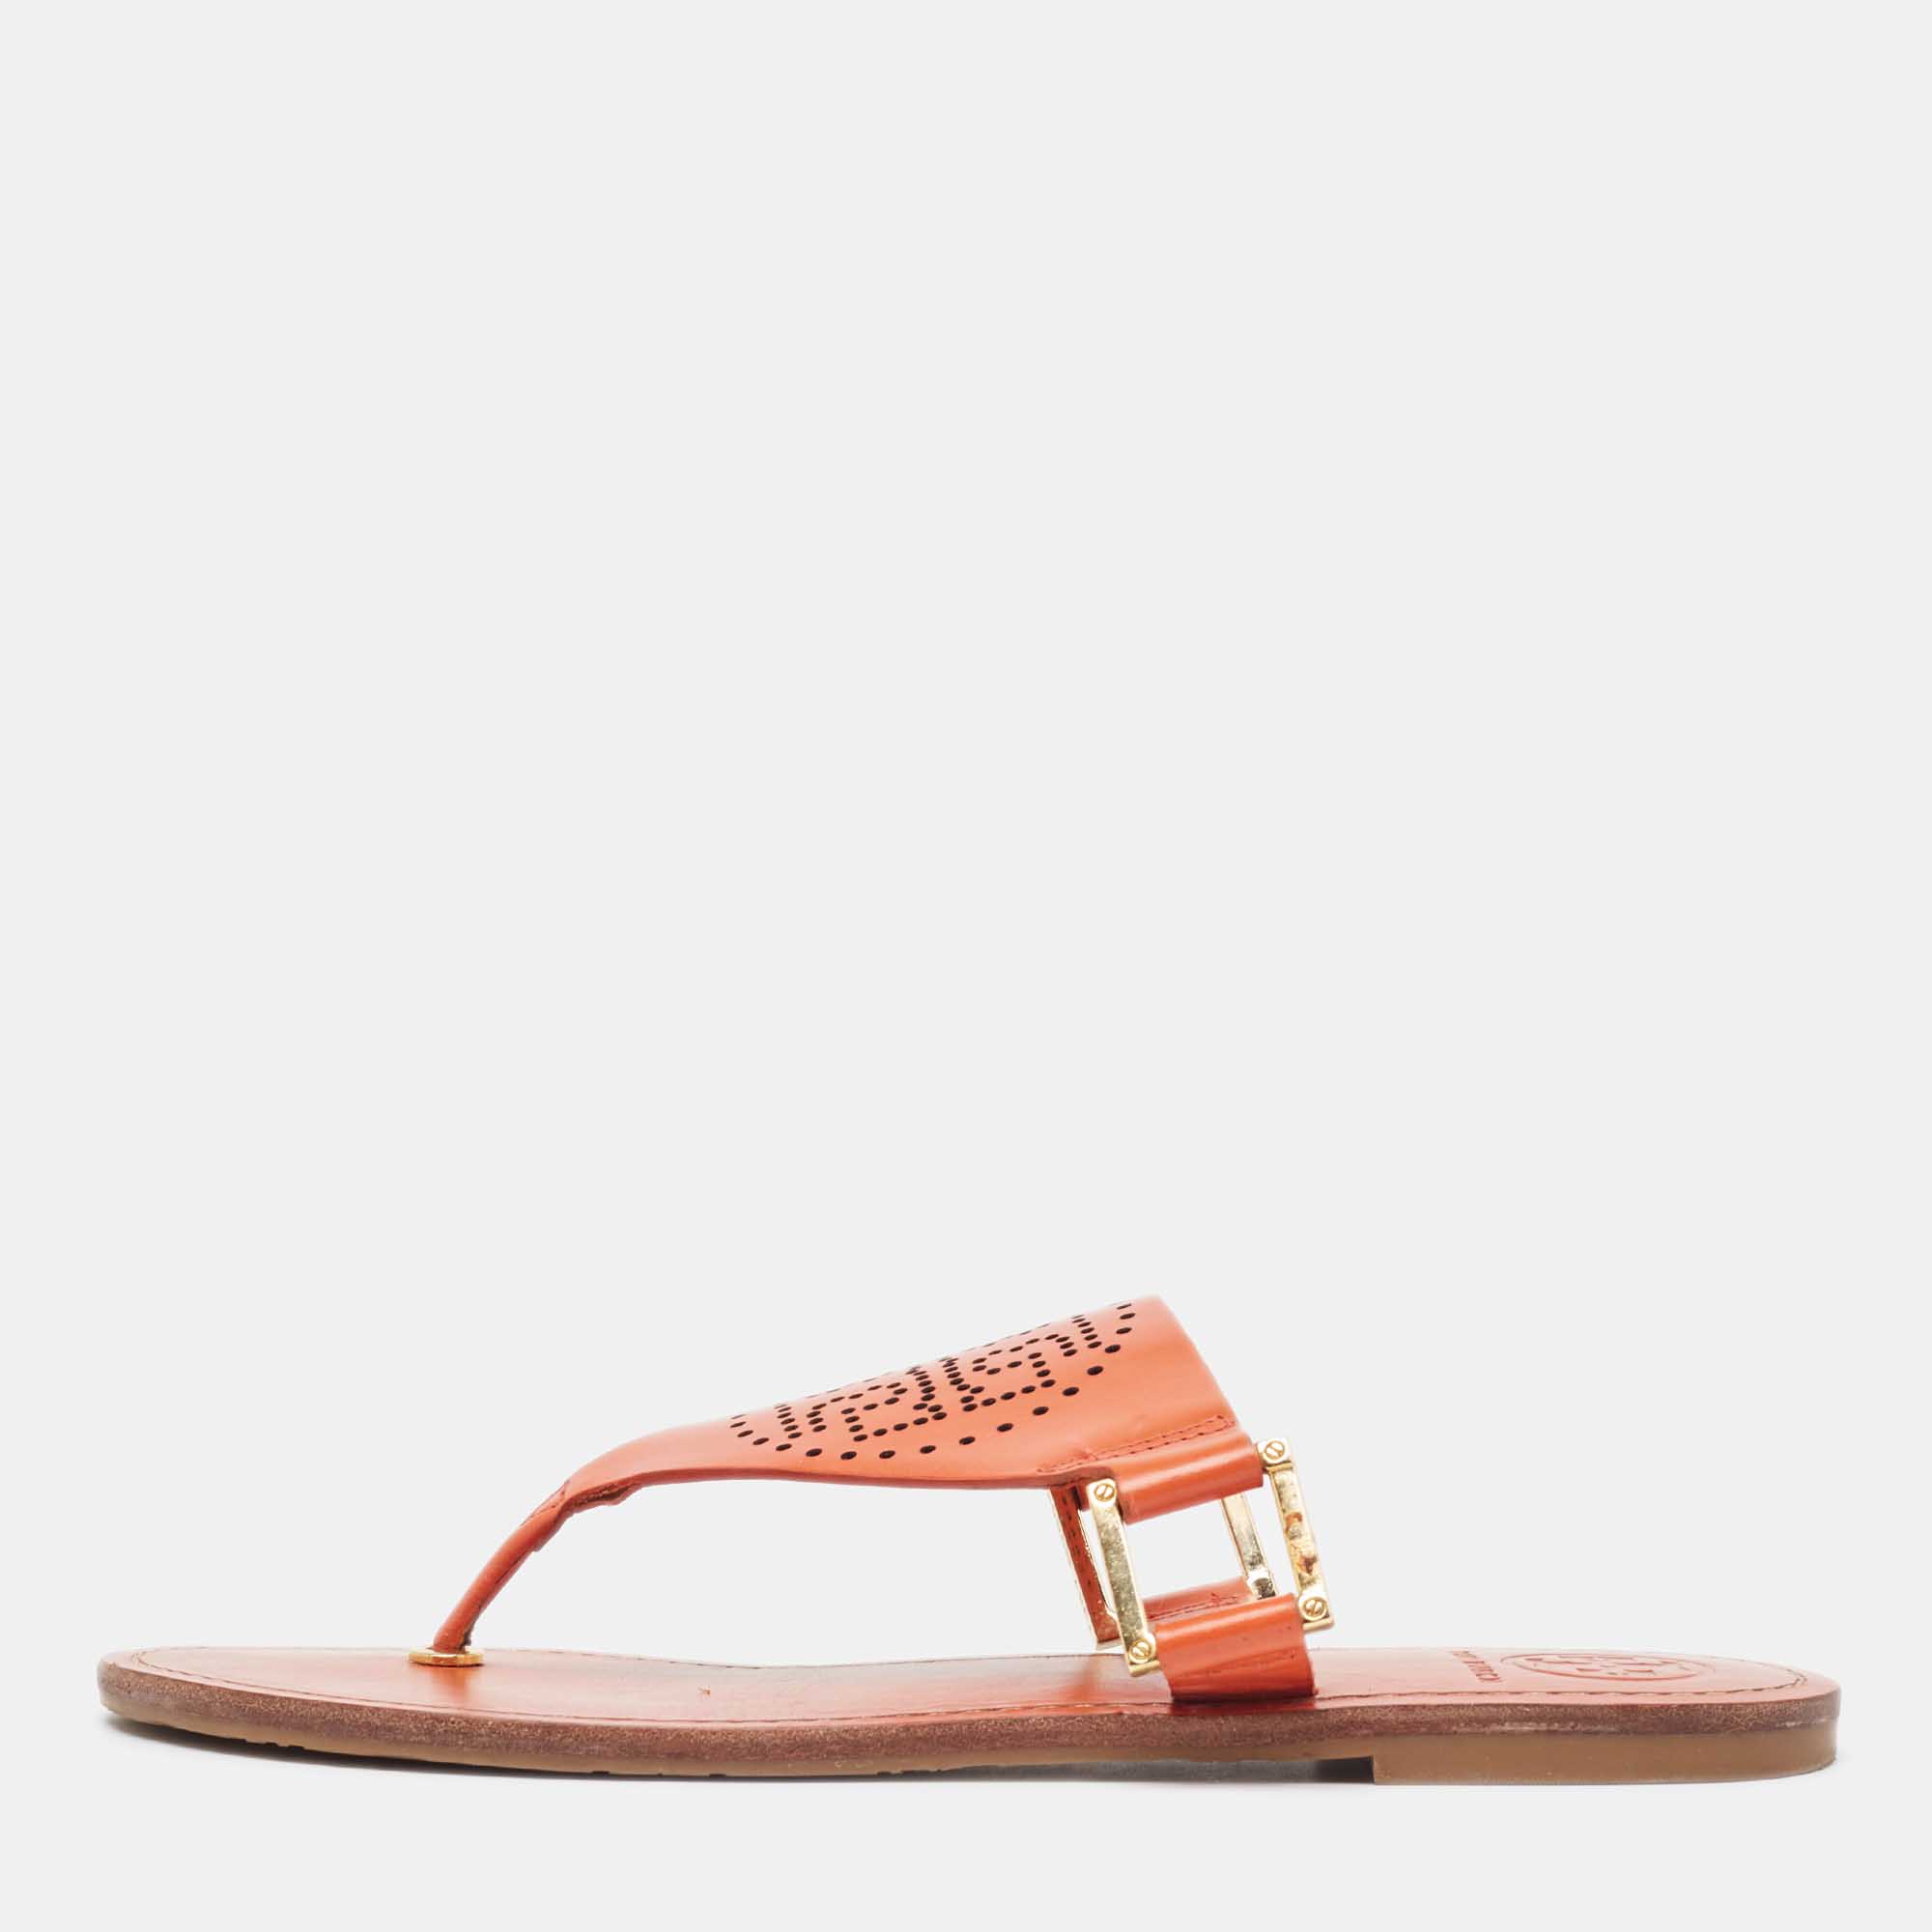 Tory burch orange perforated leather thong  sandals size 38.5